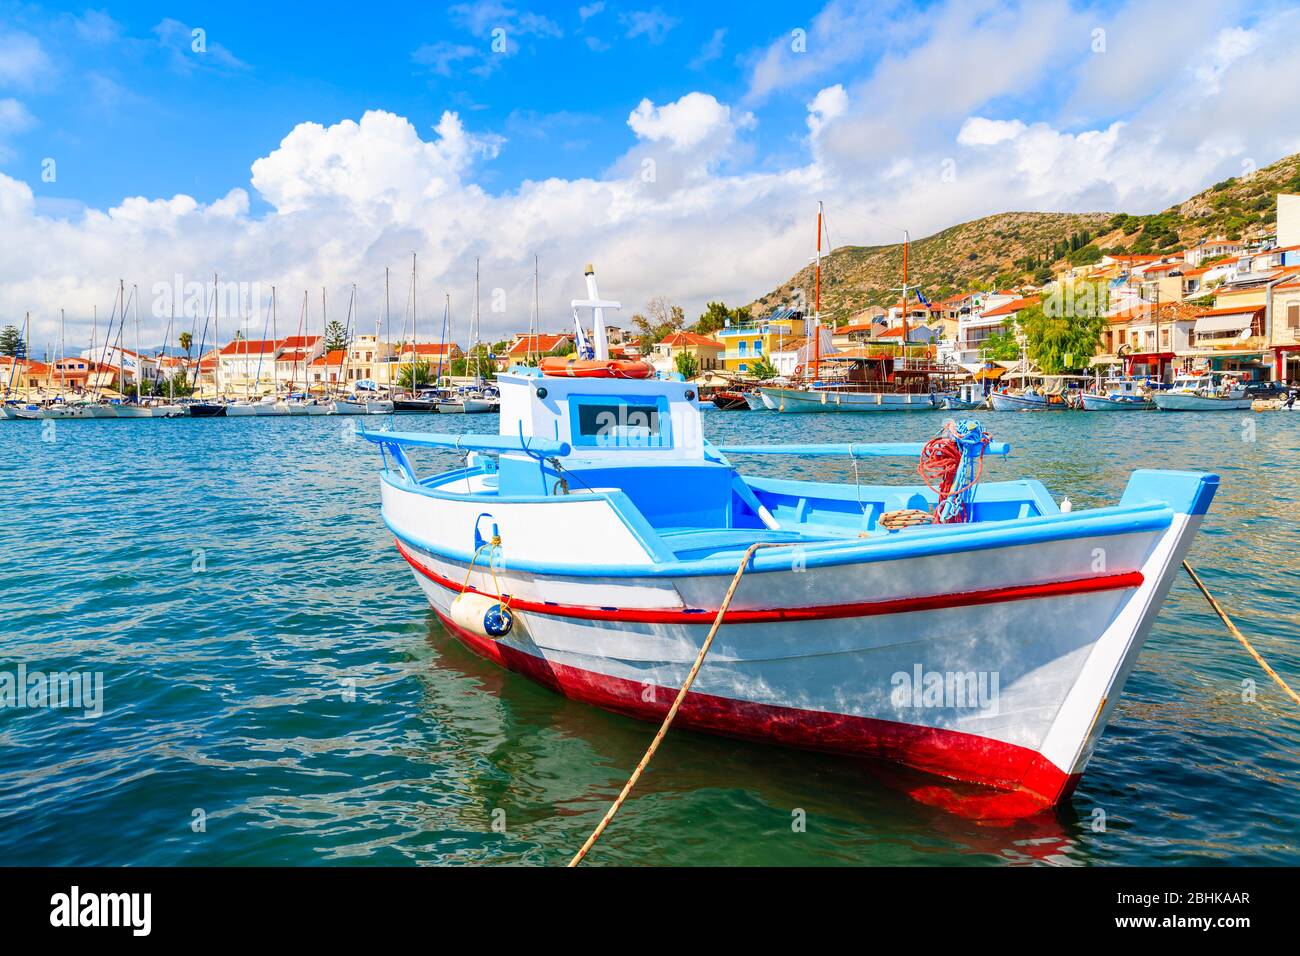 Typical colourful fishing boat in Pythagorion port, Samos island, Aegean Sea, Greece Stock Photo